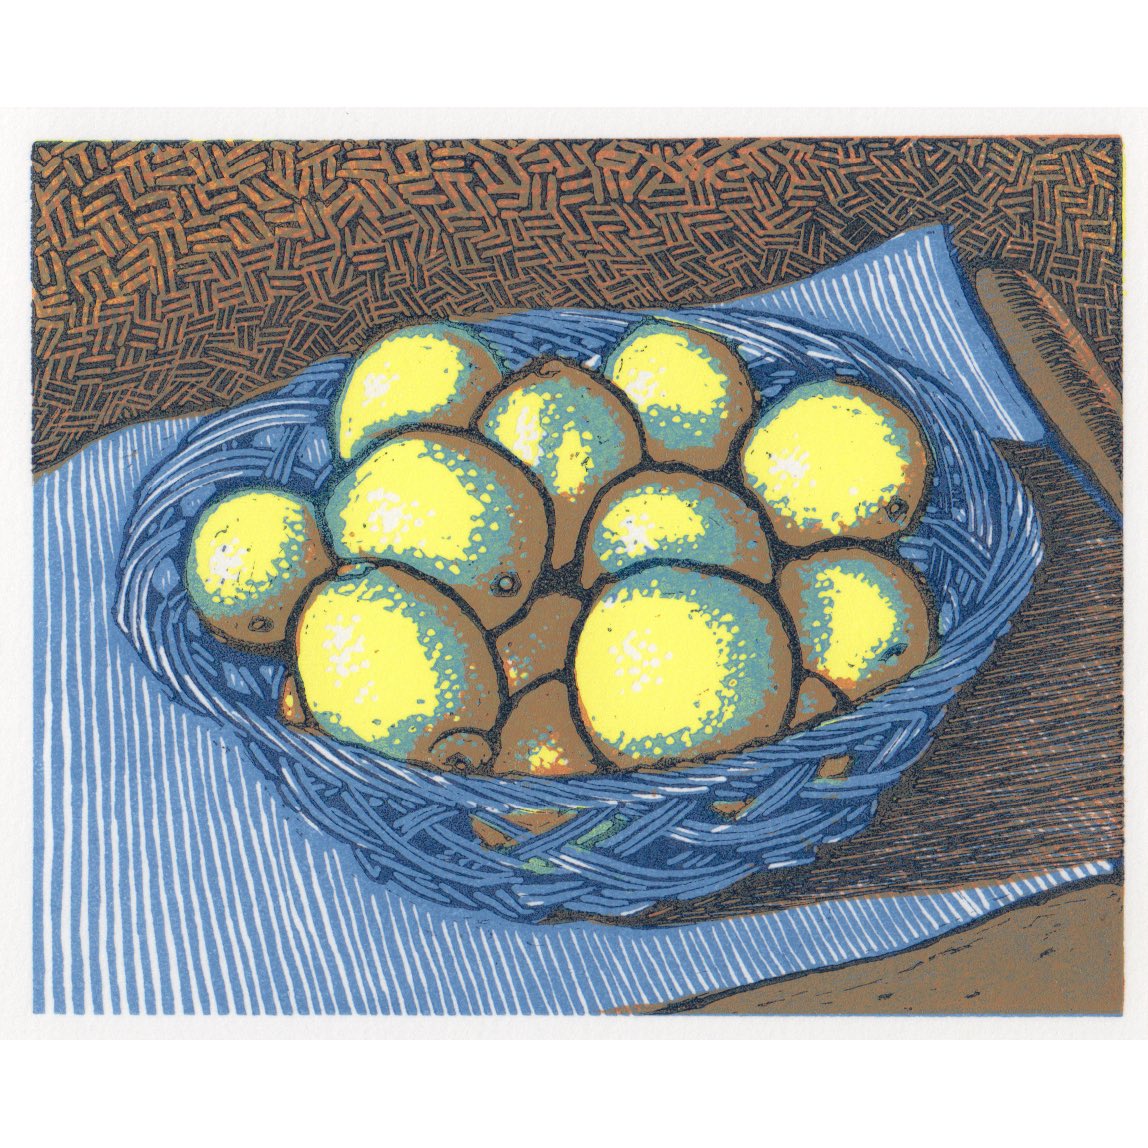 Kay A. Brown - Lemons in a Blue Basket- from the 86th SWE Annual Exhibition, on at Bankside Gallery in London until February 25th. The show will then tour. Engravings are also available from our website. societyofwoodengravers.co.uk #printmaking #woodengraving